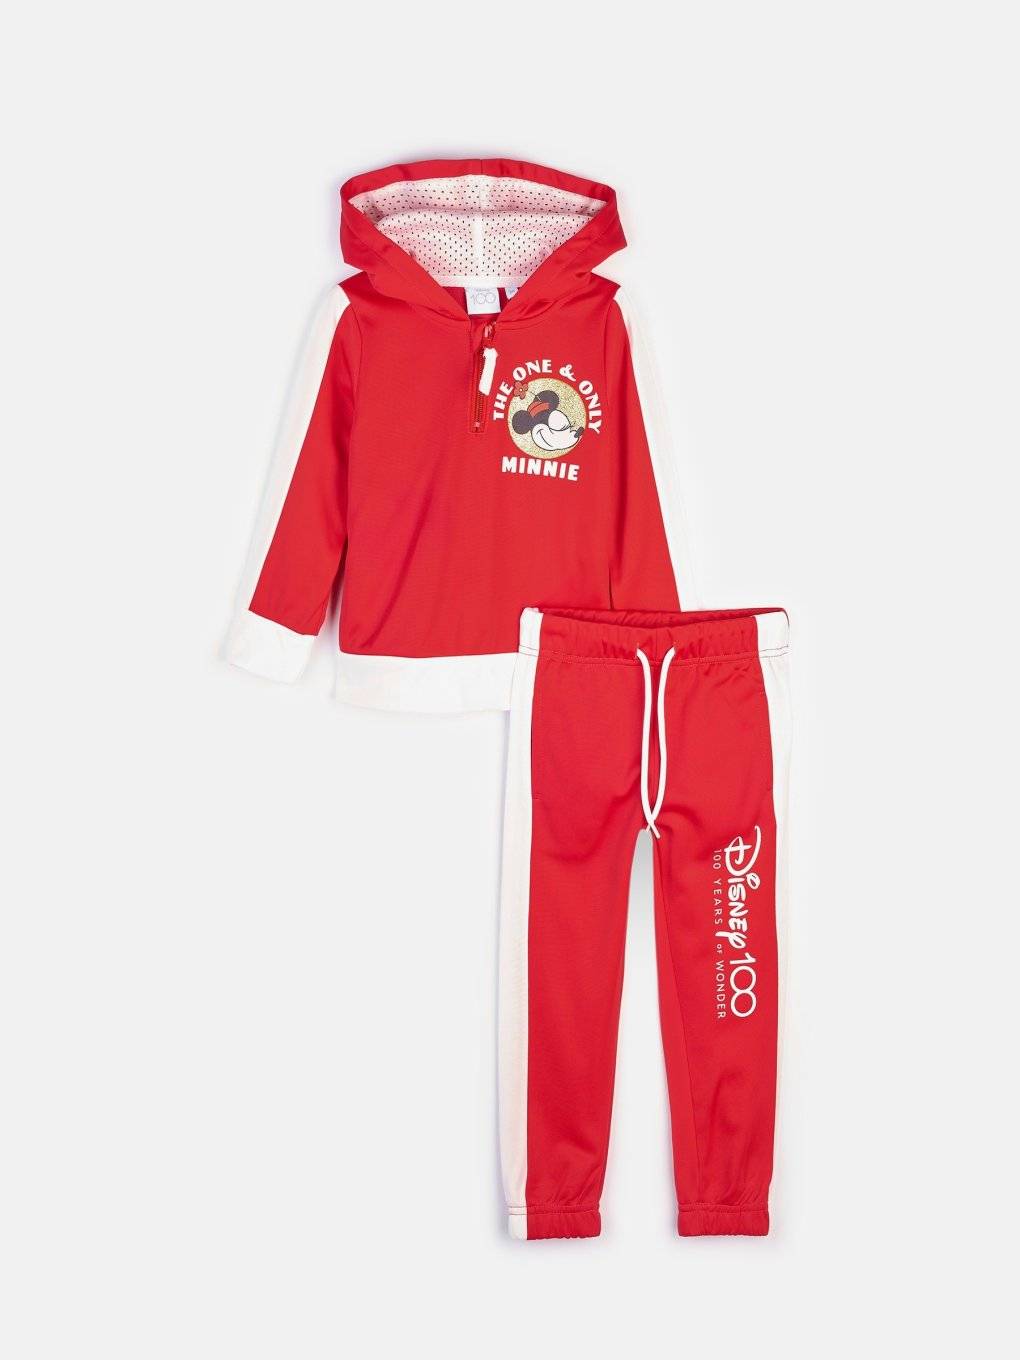 Tracksuit Minnie Mouse